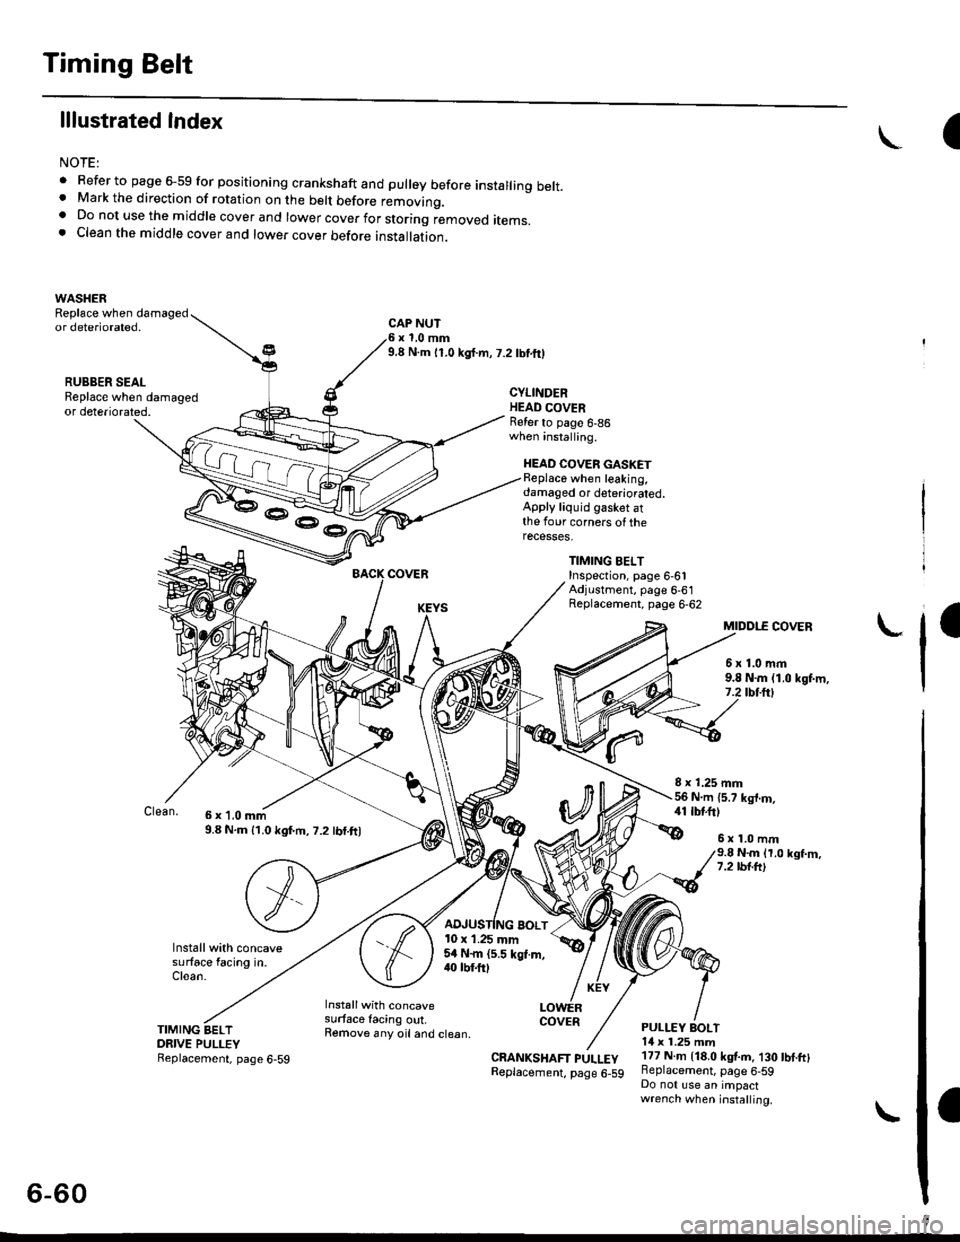 HONDA CIVIC 1999 6.G Owners Manual Timing Belt
lllustrated Index
NOTE:
. Refer to page 6-59 for positioning crankshaft and pulley before installing belt.. Mark the direction of rotation on the belt before removino.a Do not use the midd